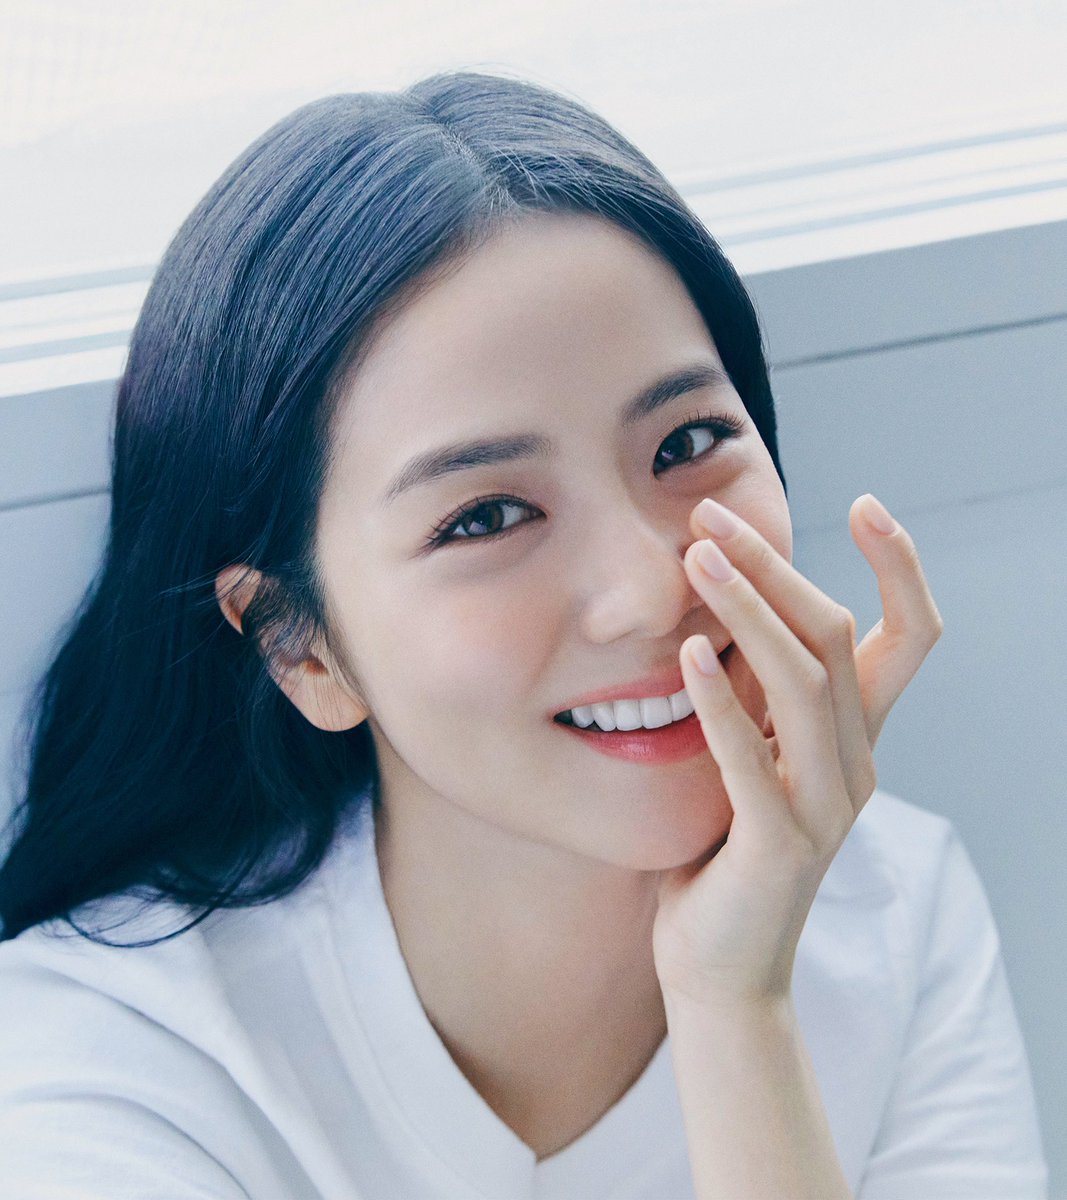 #JISOO donated all the proceeds from ‘Happiness Index 103%’ to international children’s rights ‘Save the Children’. The donation will be used for a mangrove forest creation project in Nam Can District, Ca Mau Province, Vietnam. 🔗 n.news.naver.com/entertain/arti…